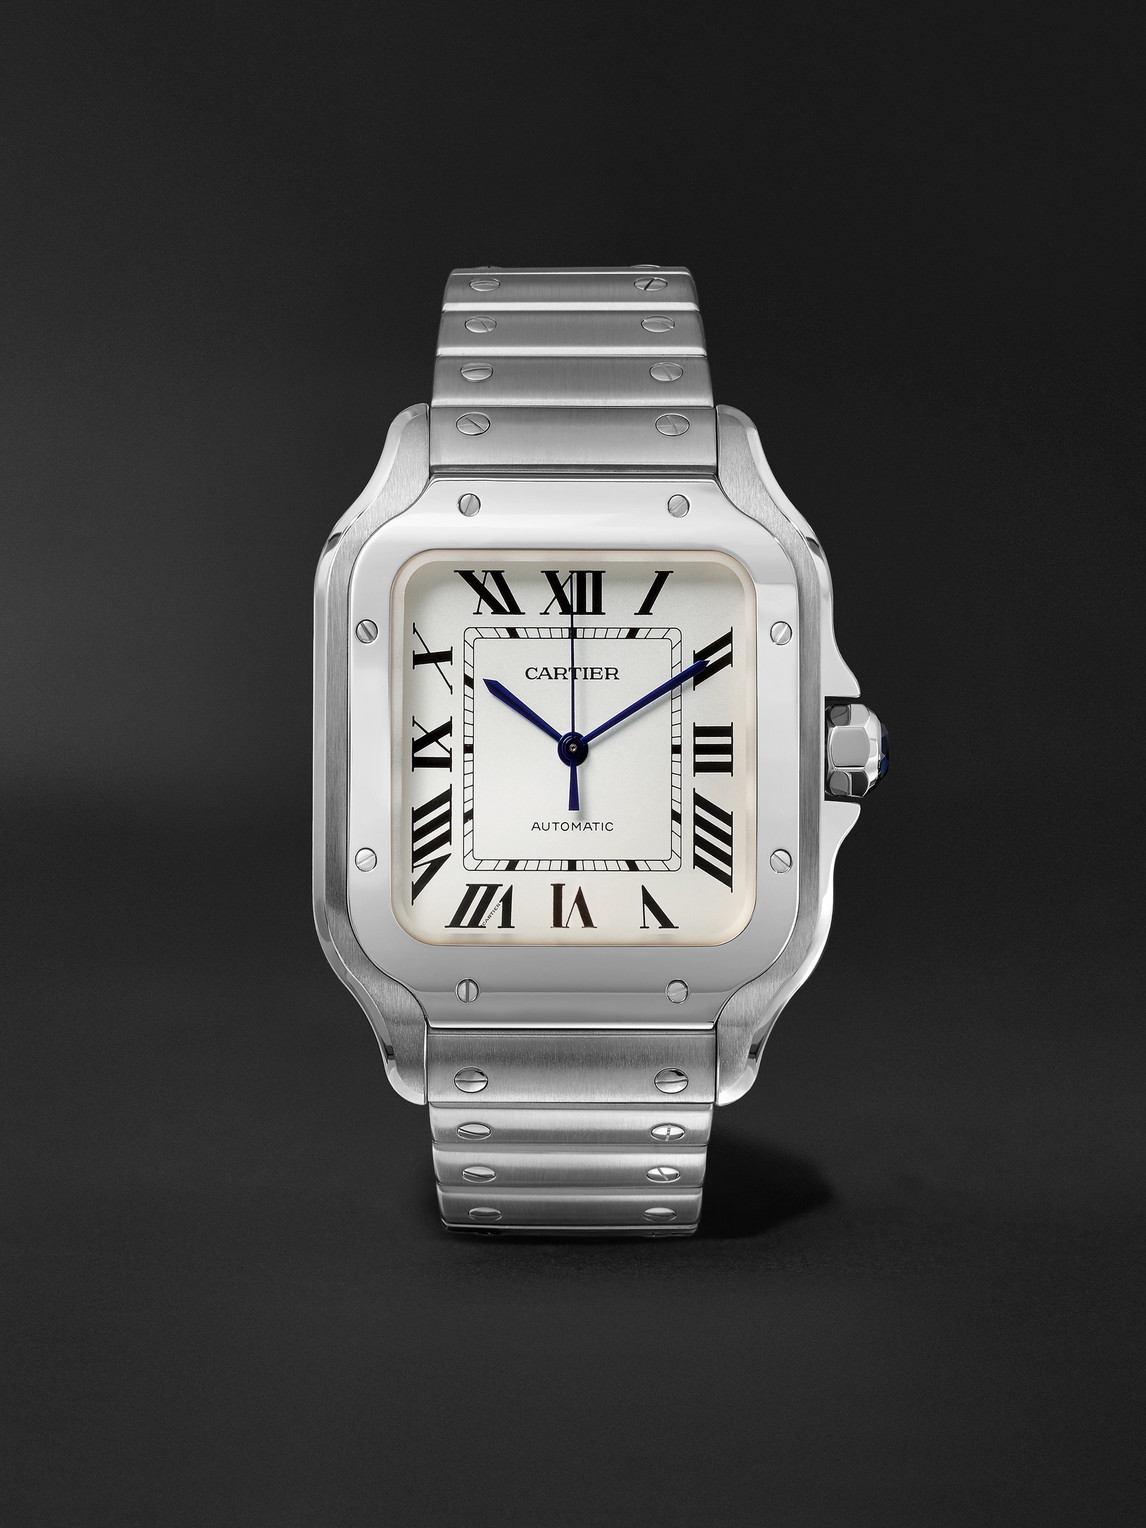 Cartier Santos Automatic 35.6mm Interchangeable Stainless Steel And Leather Watch, Ref. No. Wssa0010 In Silver